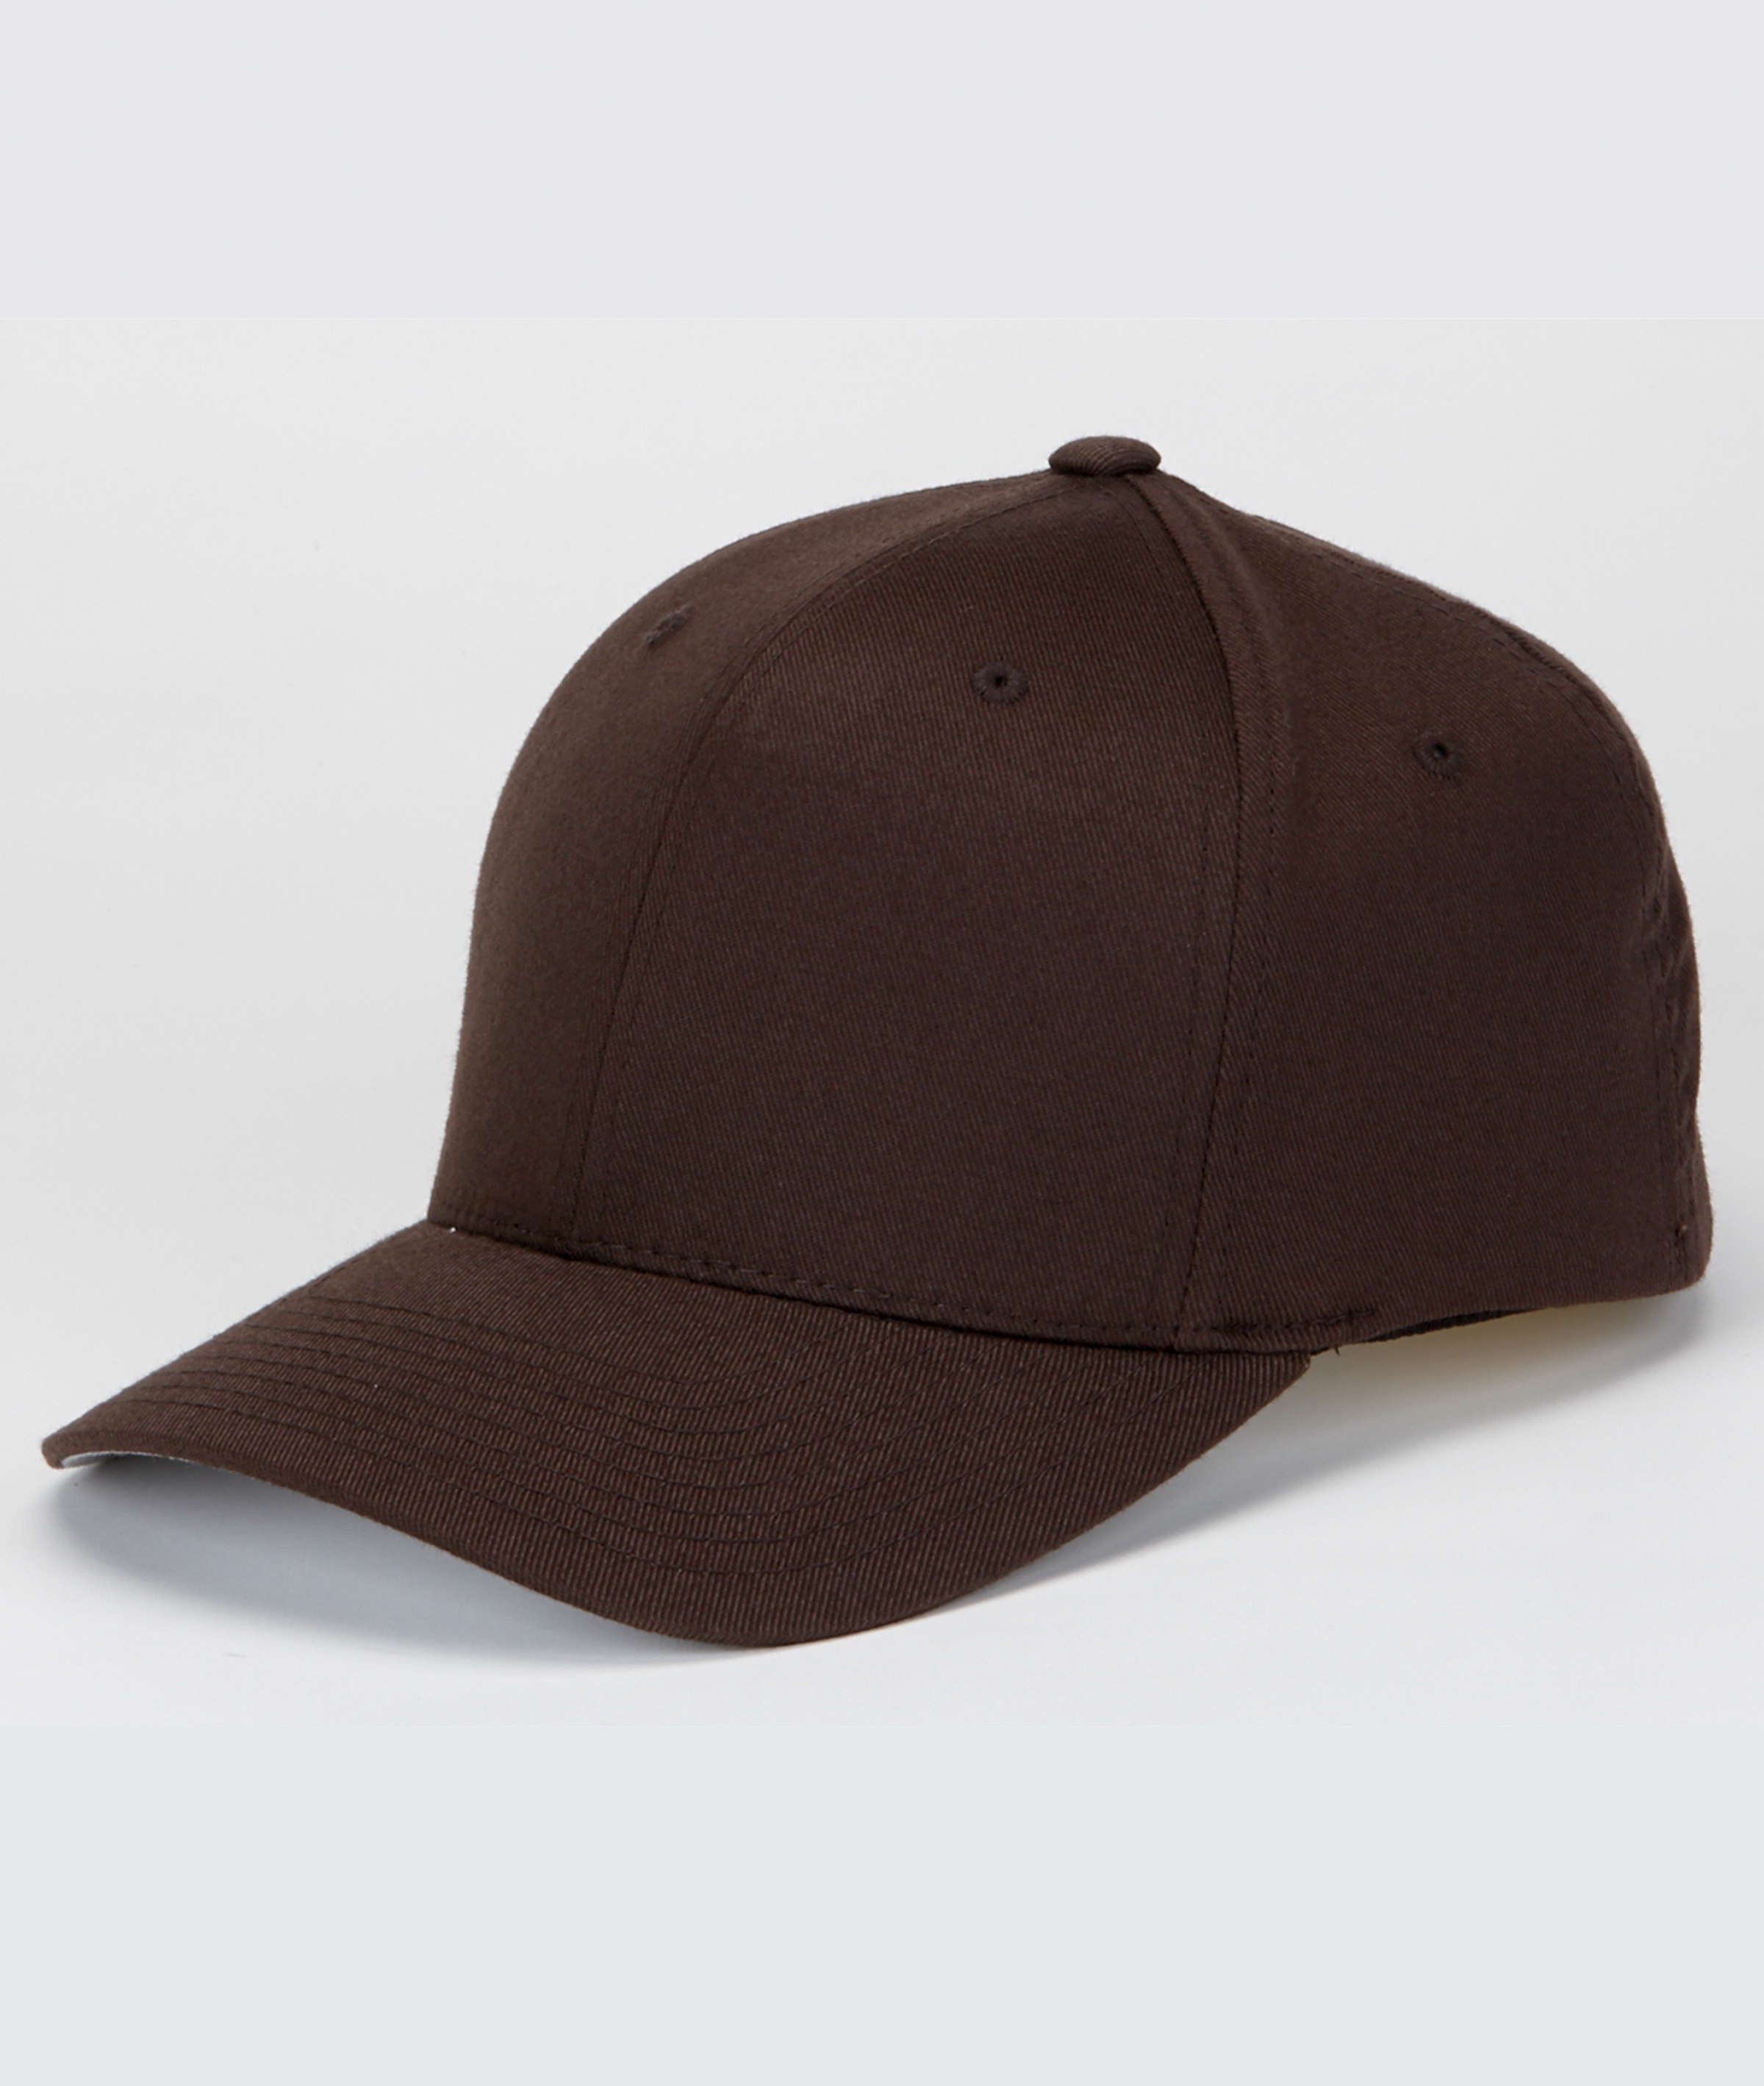 Flex Fit Wooly Combed Twill Cap – Shirts Unlimited